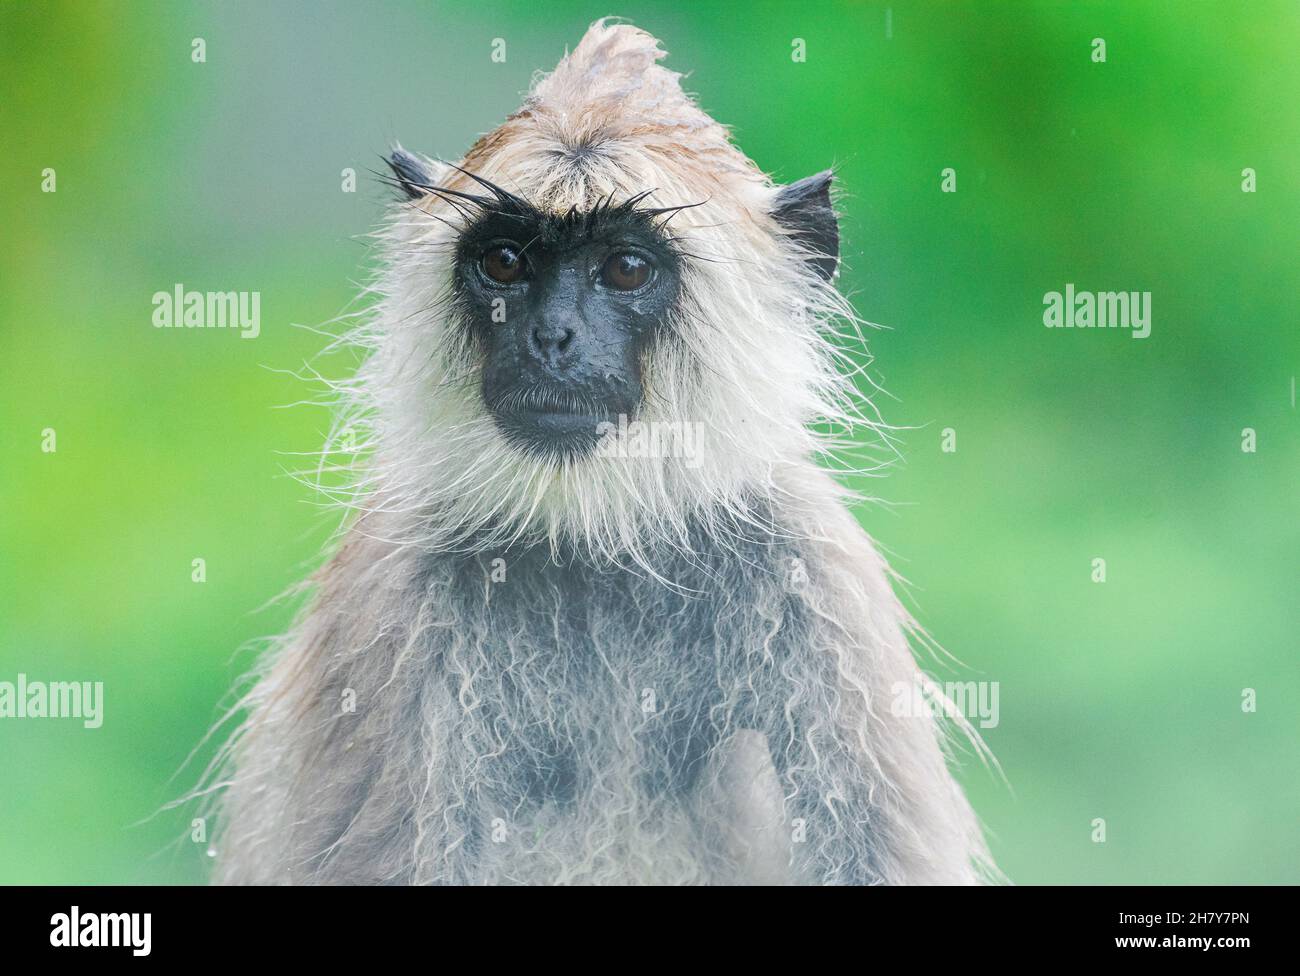 Gray langurs, also called Hanuman langurs or Hanuman monkeys, are Old World monkeys native to the Indian subcontinent. Stock Photo